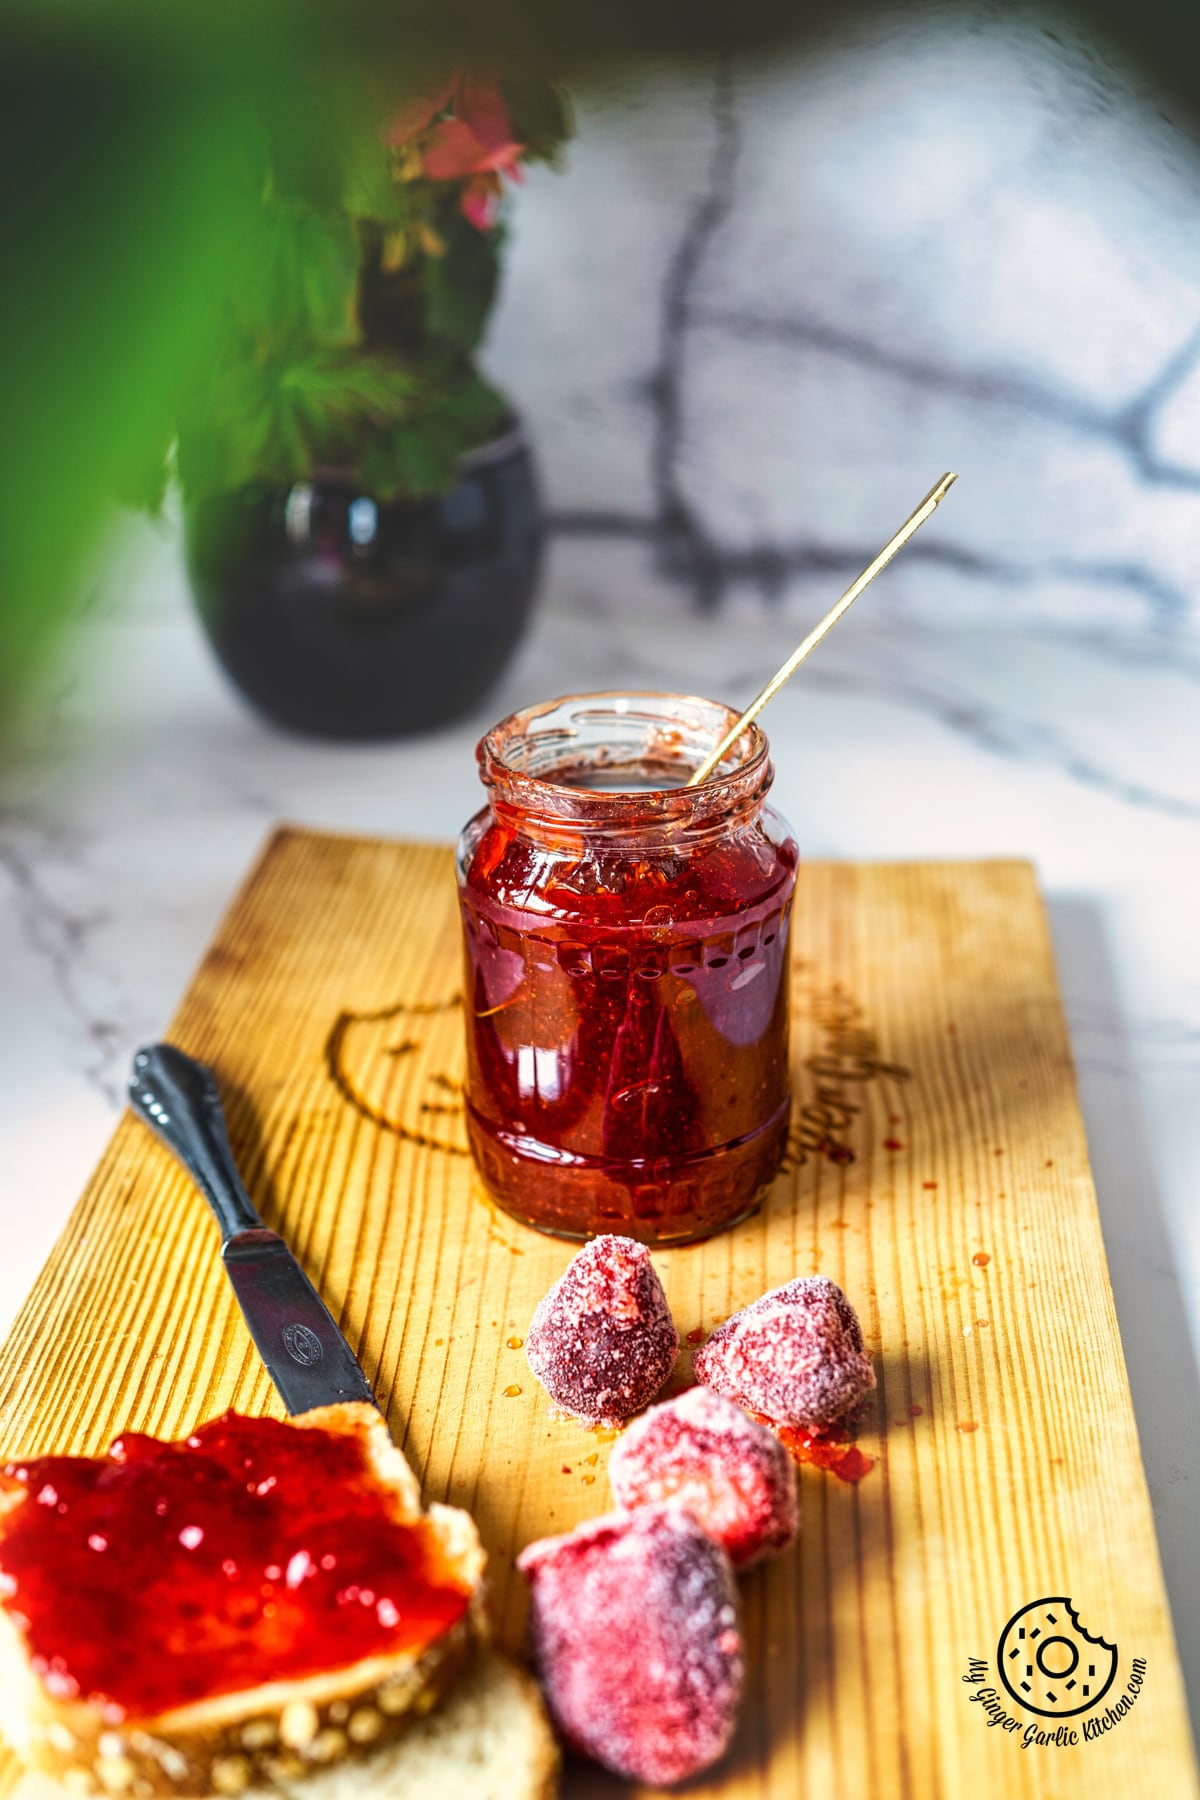 strawberry jam in a glass jar with knife and some strawberries on the side